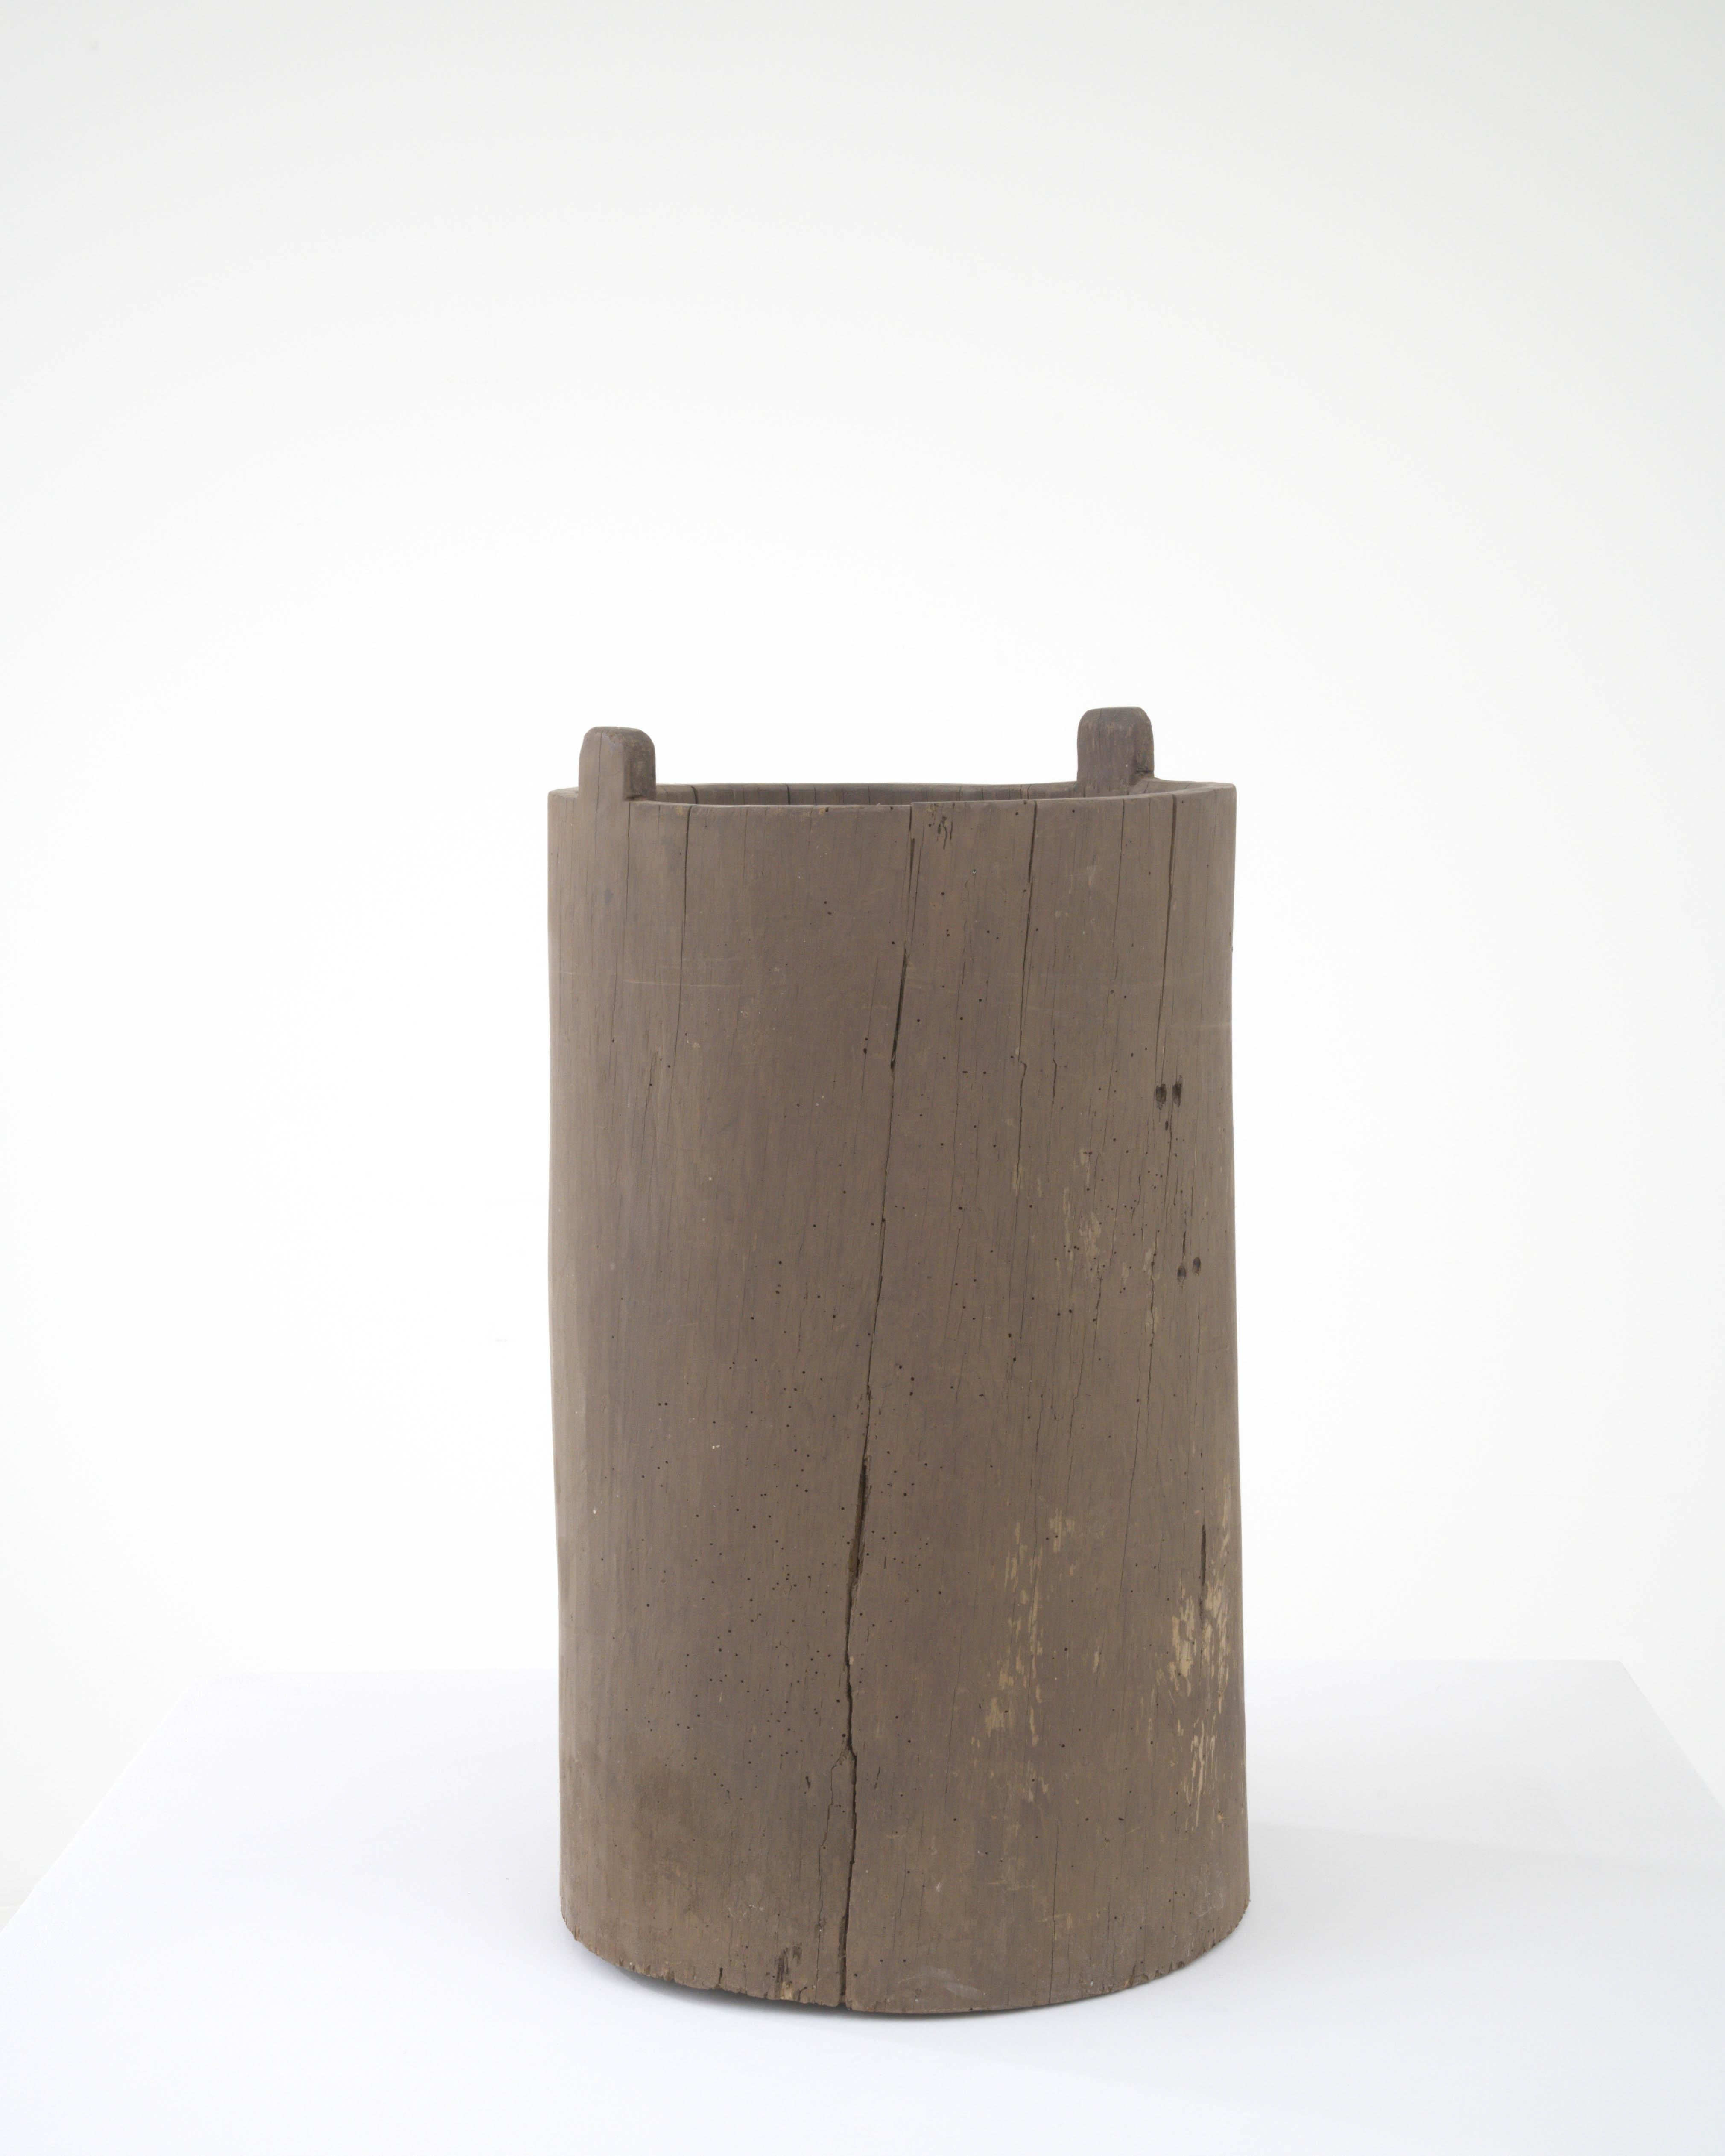 19th Century European Wooden Grain Container For Sale 3